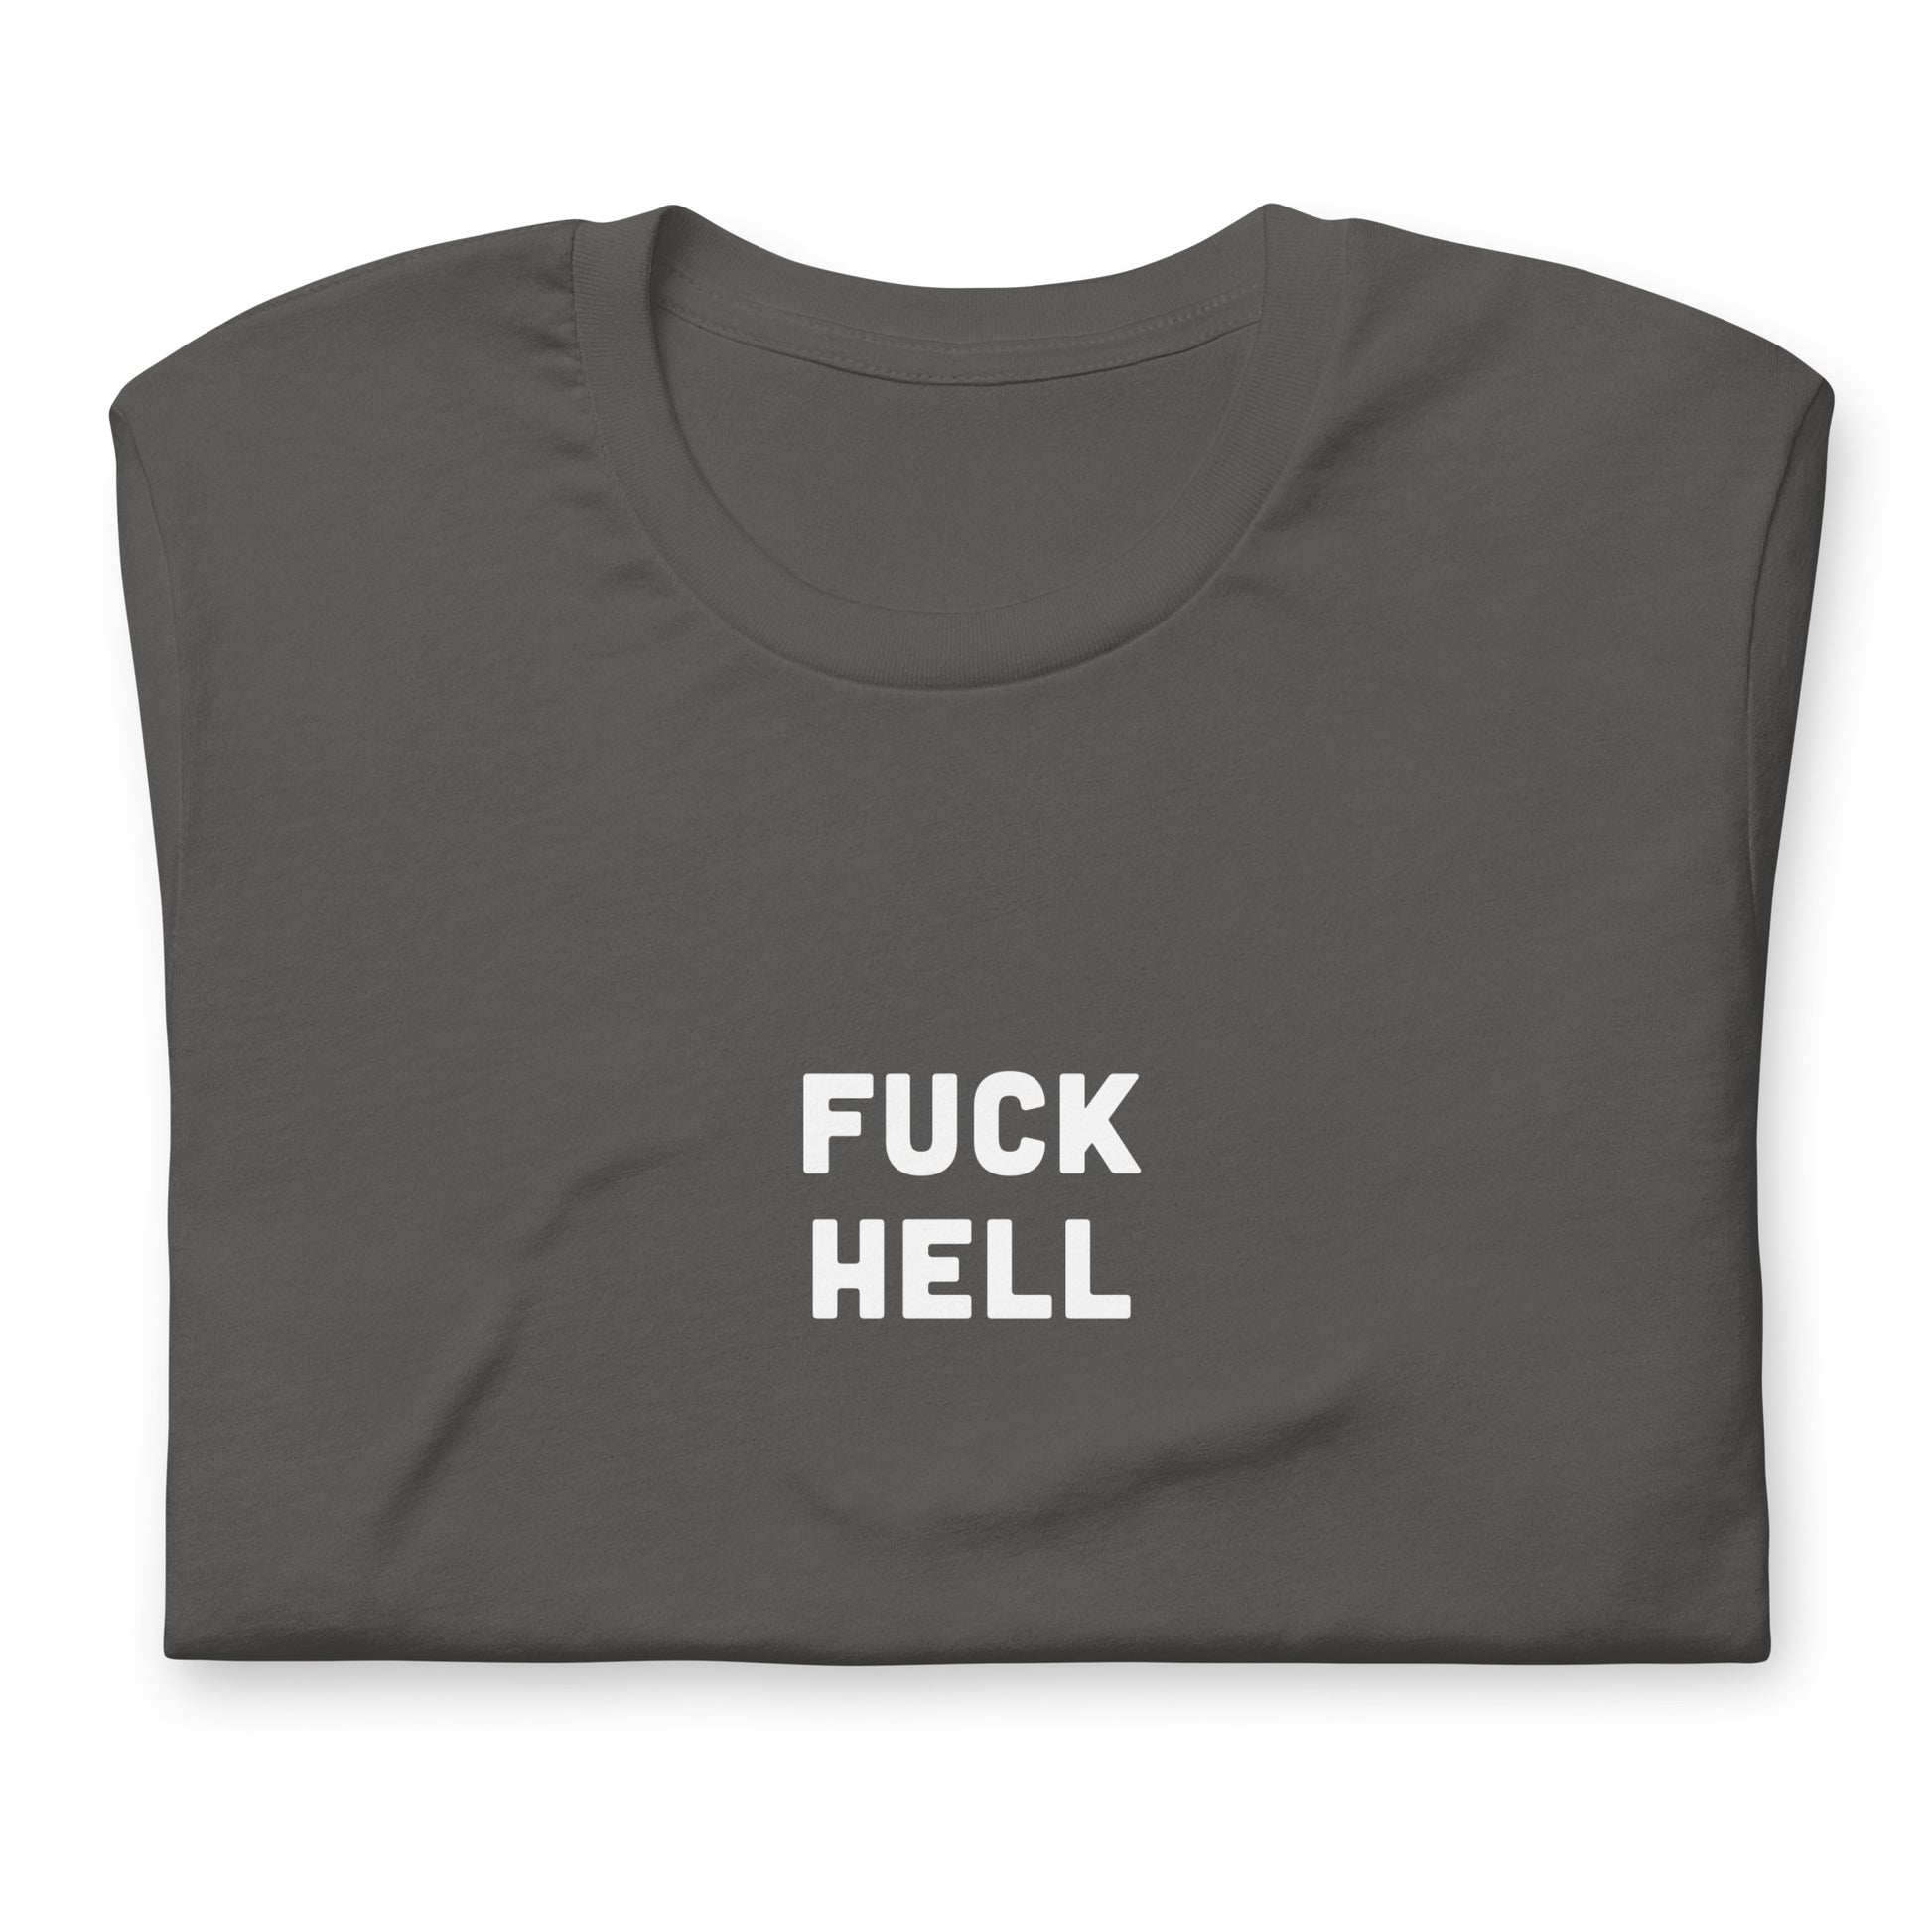 Fuck Hell T-Shirt Size 2XL Color Black